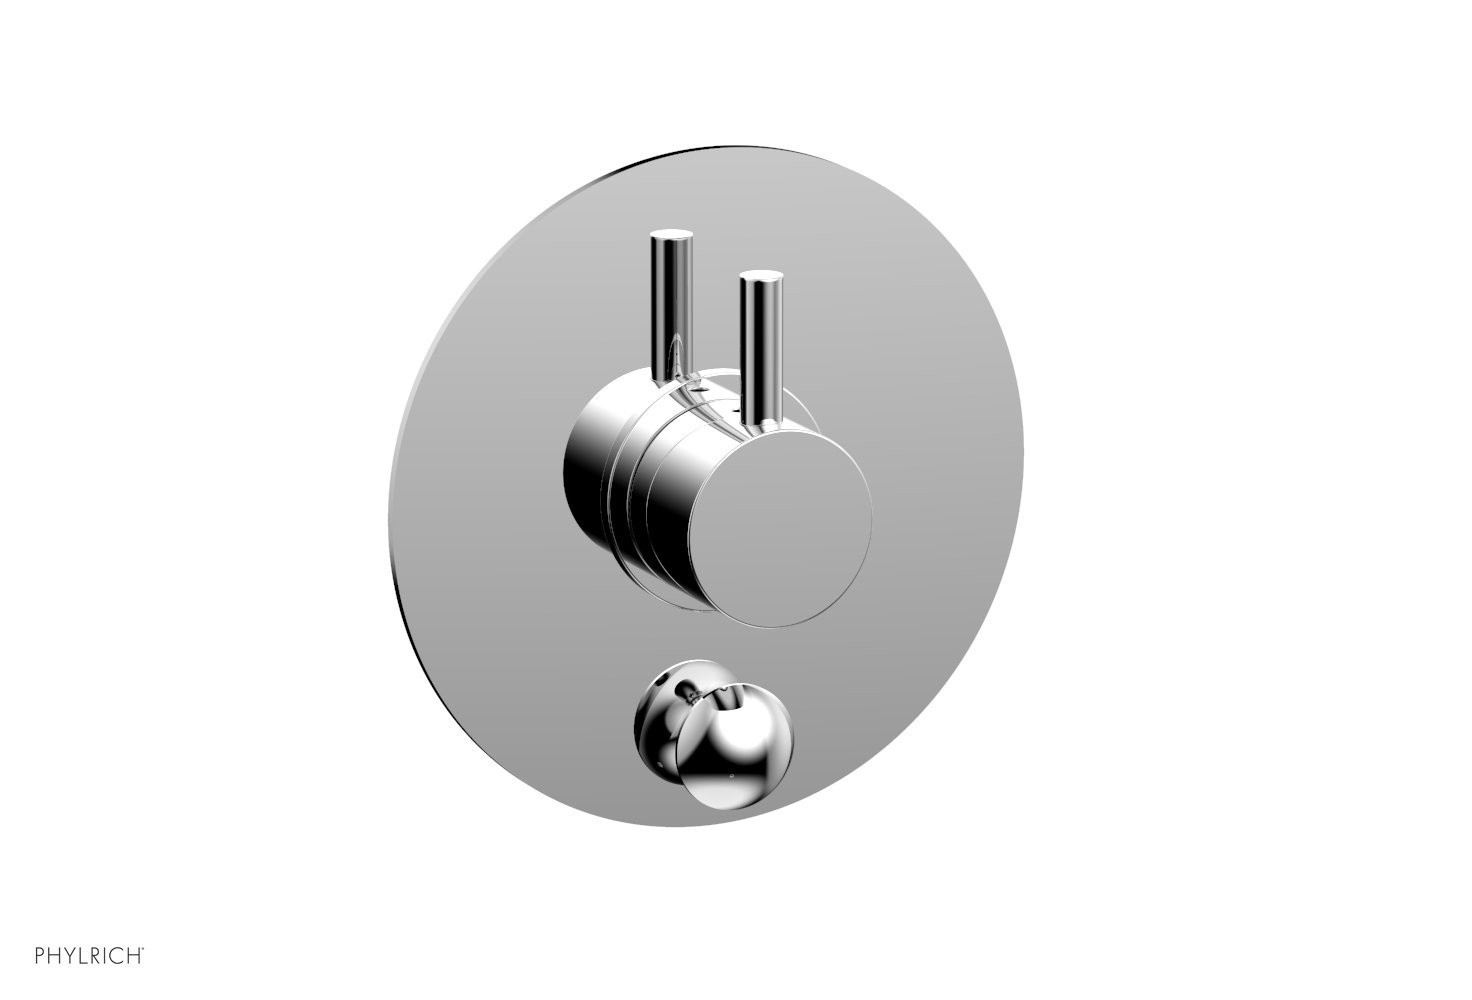 PHYLRICH 4-199 BASIC II WALL MOUNT PRESSURE BALANCE SHOWER PLATE WITH DIVERTER AND LEVER HANDLE TRIM